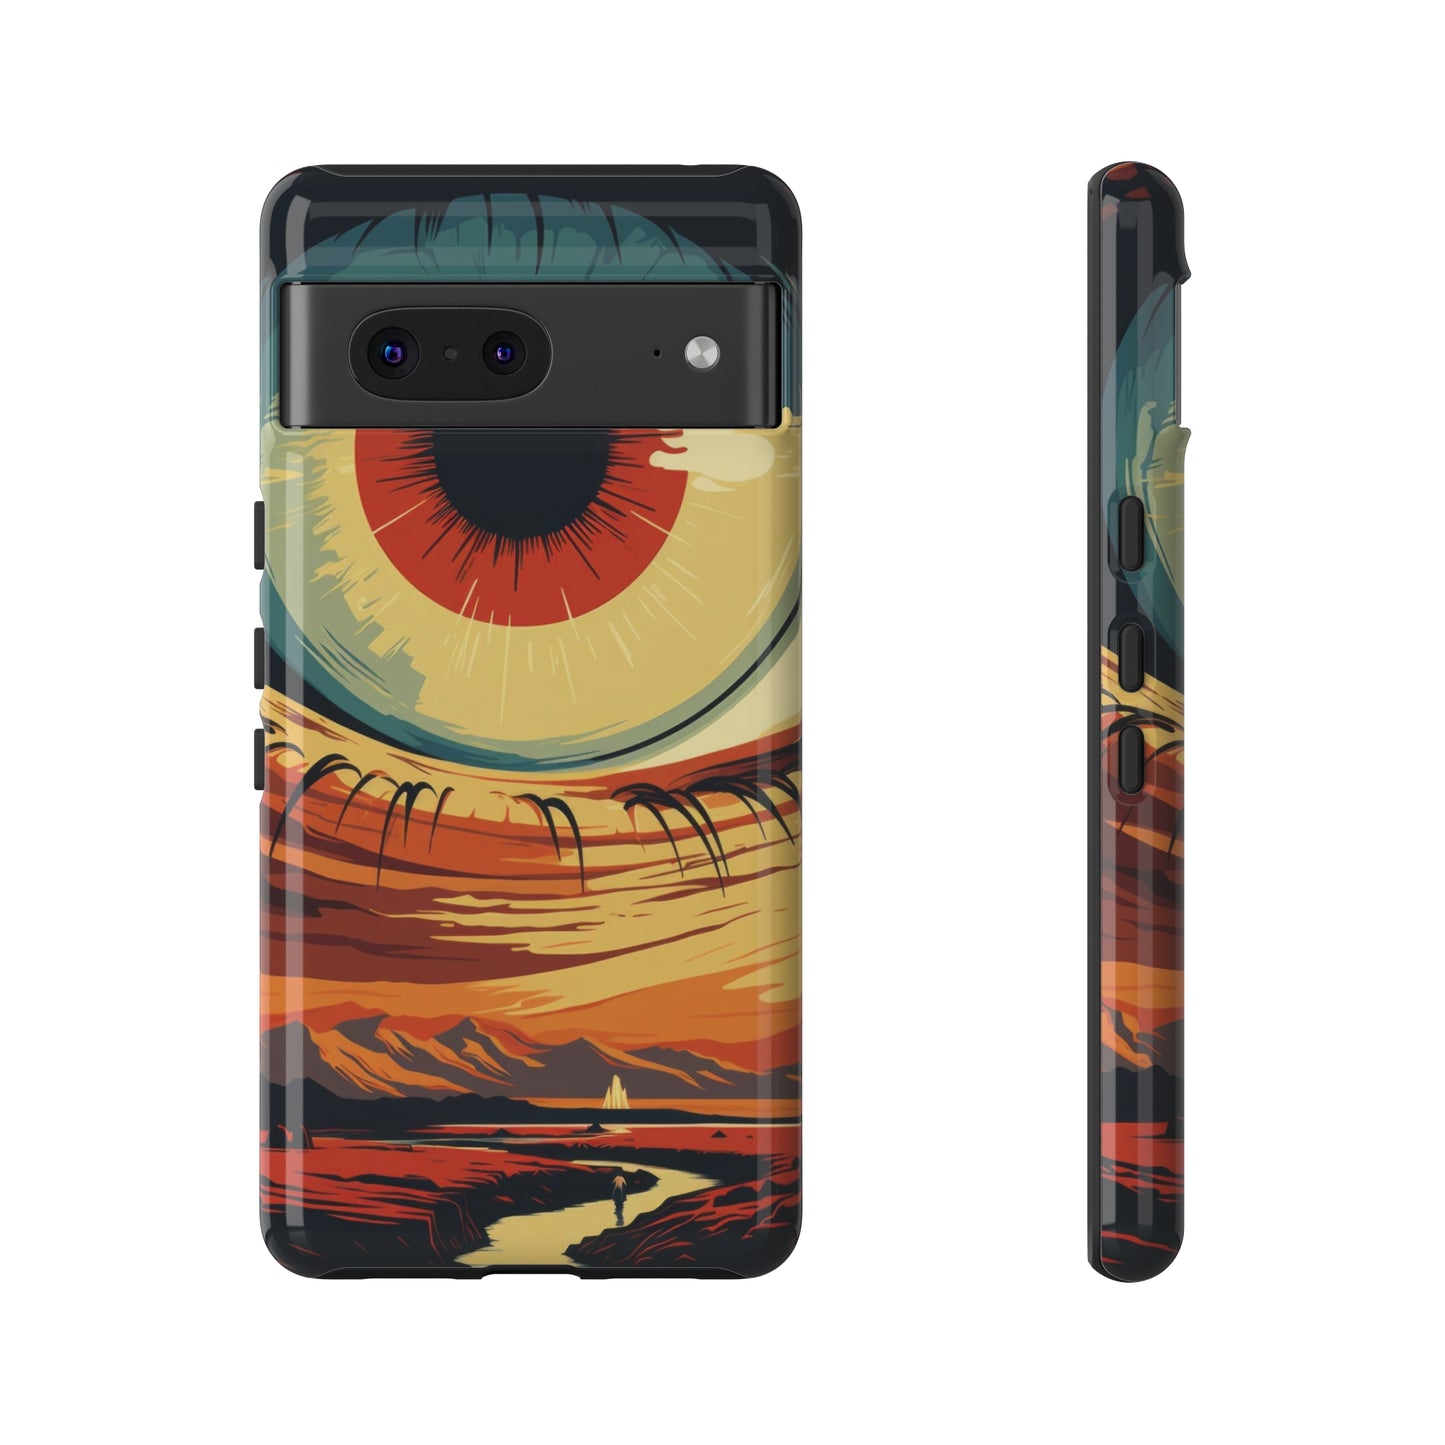 Nature's Beholder: Red Eye Gazing Intently Phone Case for iPhone, Samsung, Pixel